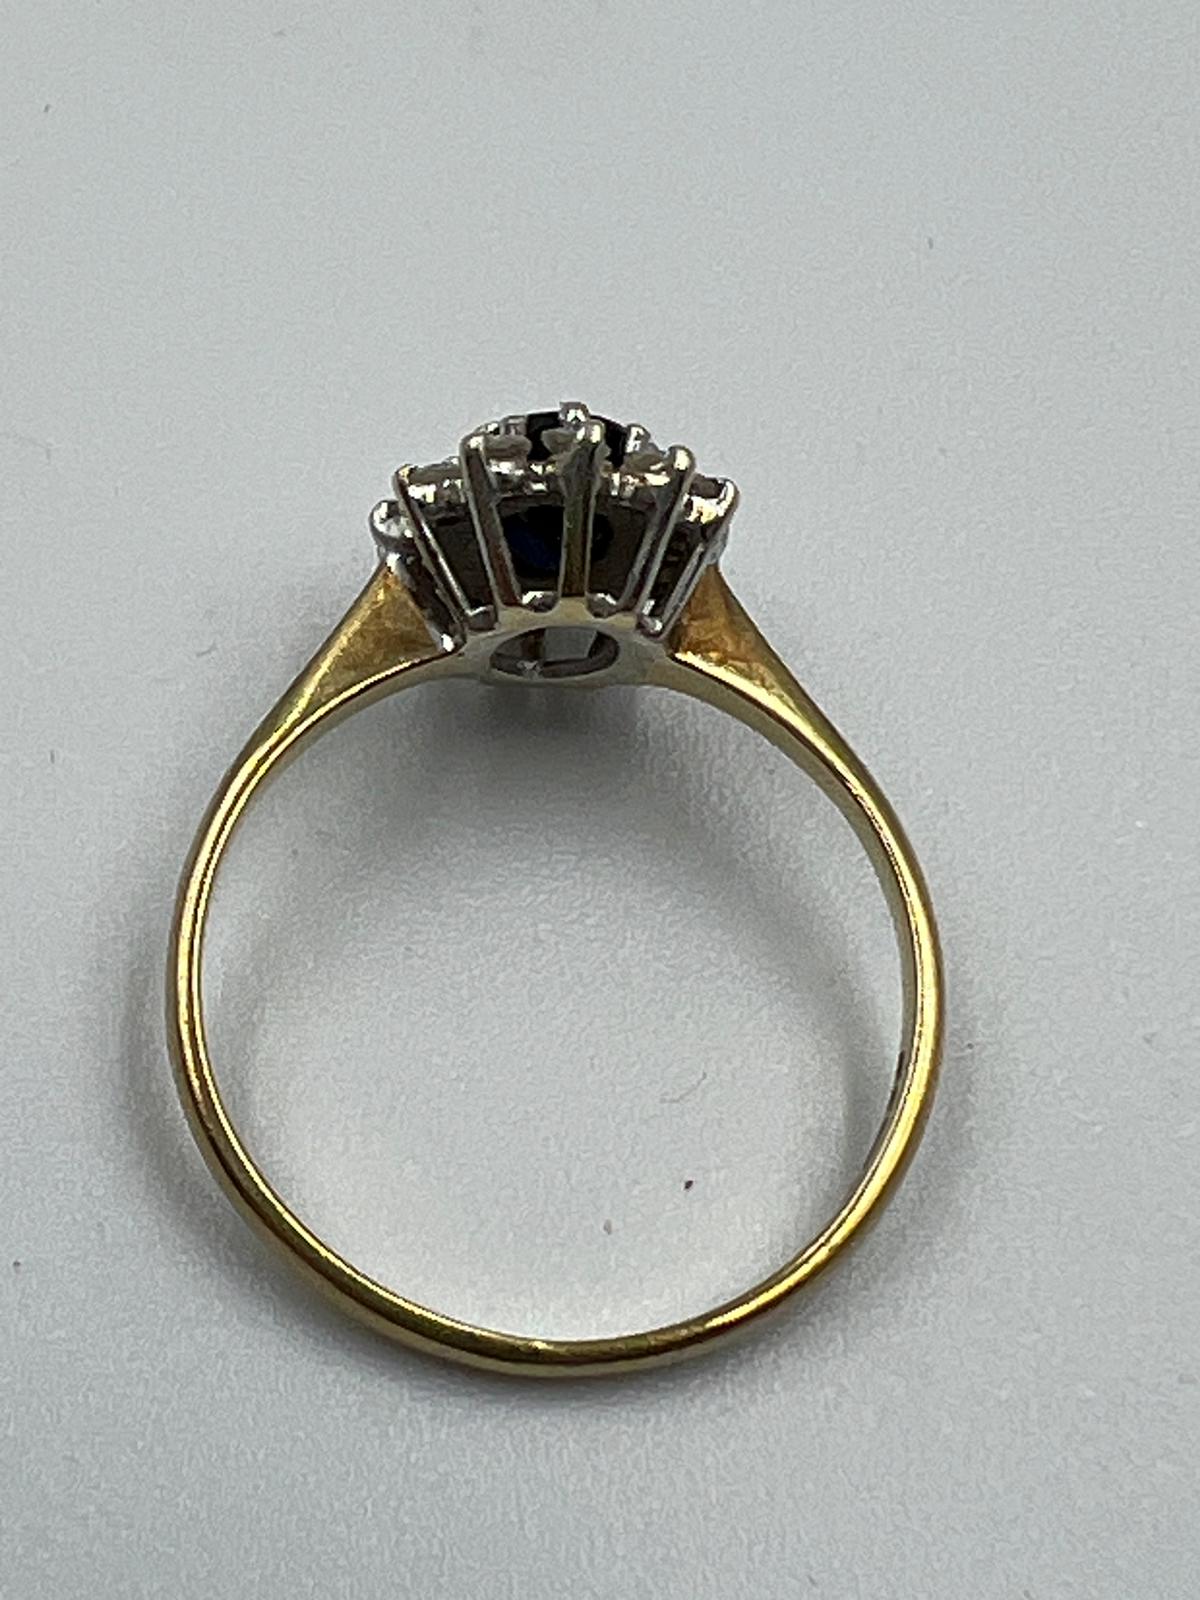 A 9ct gold sapphire and diamond ring in a daisy style, approximate size L. - Image 6 of 7